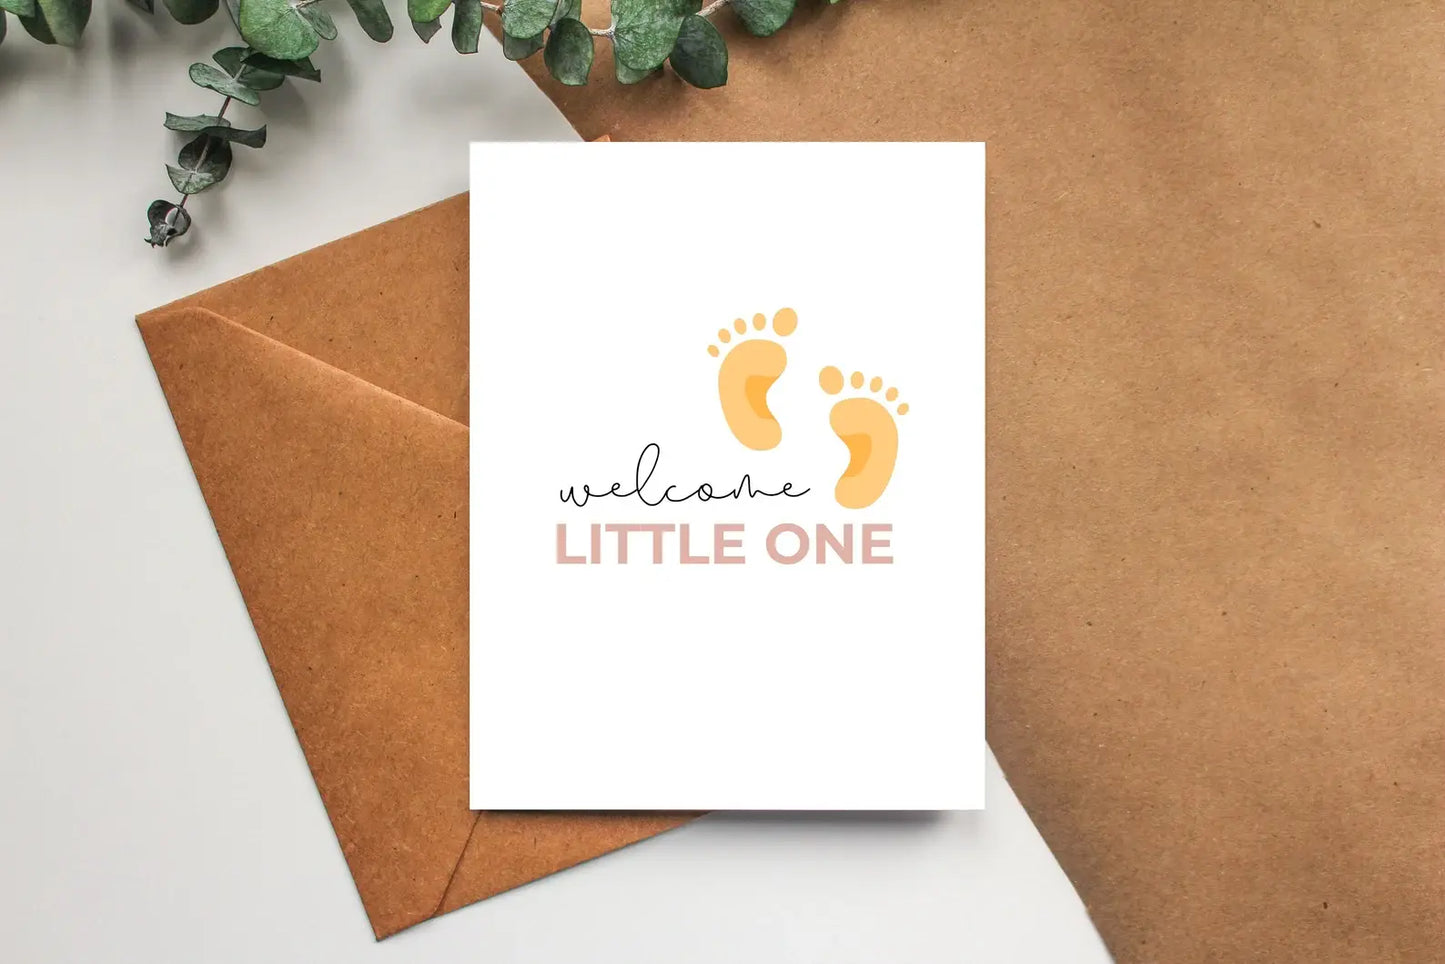 Welcome Little One - New Baby Greeting Card